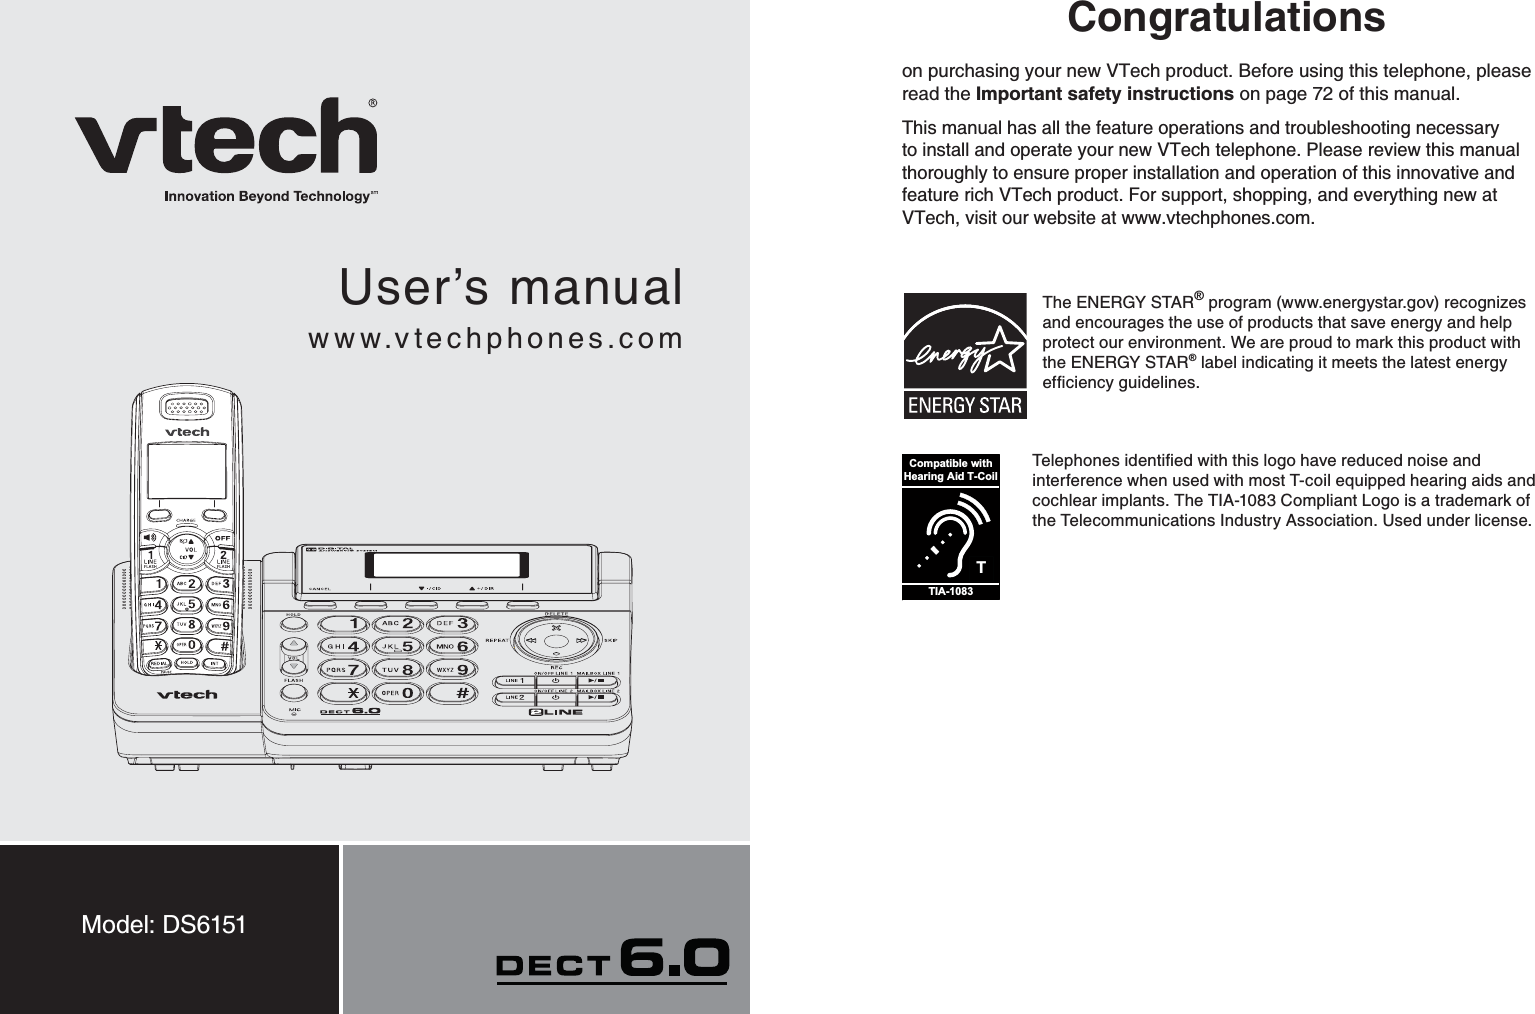 User’s manualwww.vtechphones.comModel: DS6151Congratulationson purchasing your new VTech product. Before using this telephone, please read the Important safety instructions on page 72 of this manual.This manual has all the feature operations and troubleshooting necessary to install and operate your new VTech telephone. Please review this manual thoroughly to ensure proper installation and operation of this innovative and feature rich VTech product. For support, shopping, and everything new at VTech, visit our website at www.vtechphones.com.The ENERGY STAR® program (www.energystar.gov) recognizes and encourages the use of products that save energy and help protect our environment. We are proud to mark this product with the ENERGY STAR® label indicating it meets the latest energy GHſEKGPE[IWKFGNKPGUTCompatible withHearing Aid T-CoilTIA-10836GNGRJQPGUKFGPVKſGFYKVJVJKUNQIQJCXGTGFWEGFPQKUGCPFinterference when used with most T-coil equipped hearing aids and cochlear implants. The TIA-1083 Compliant Logo is a trademark of the Telecommunications Industry Association. Used under license.